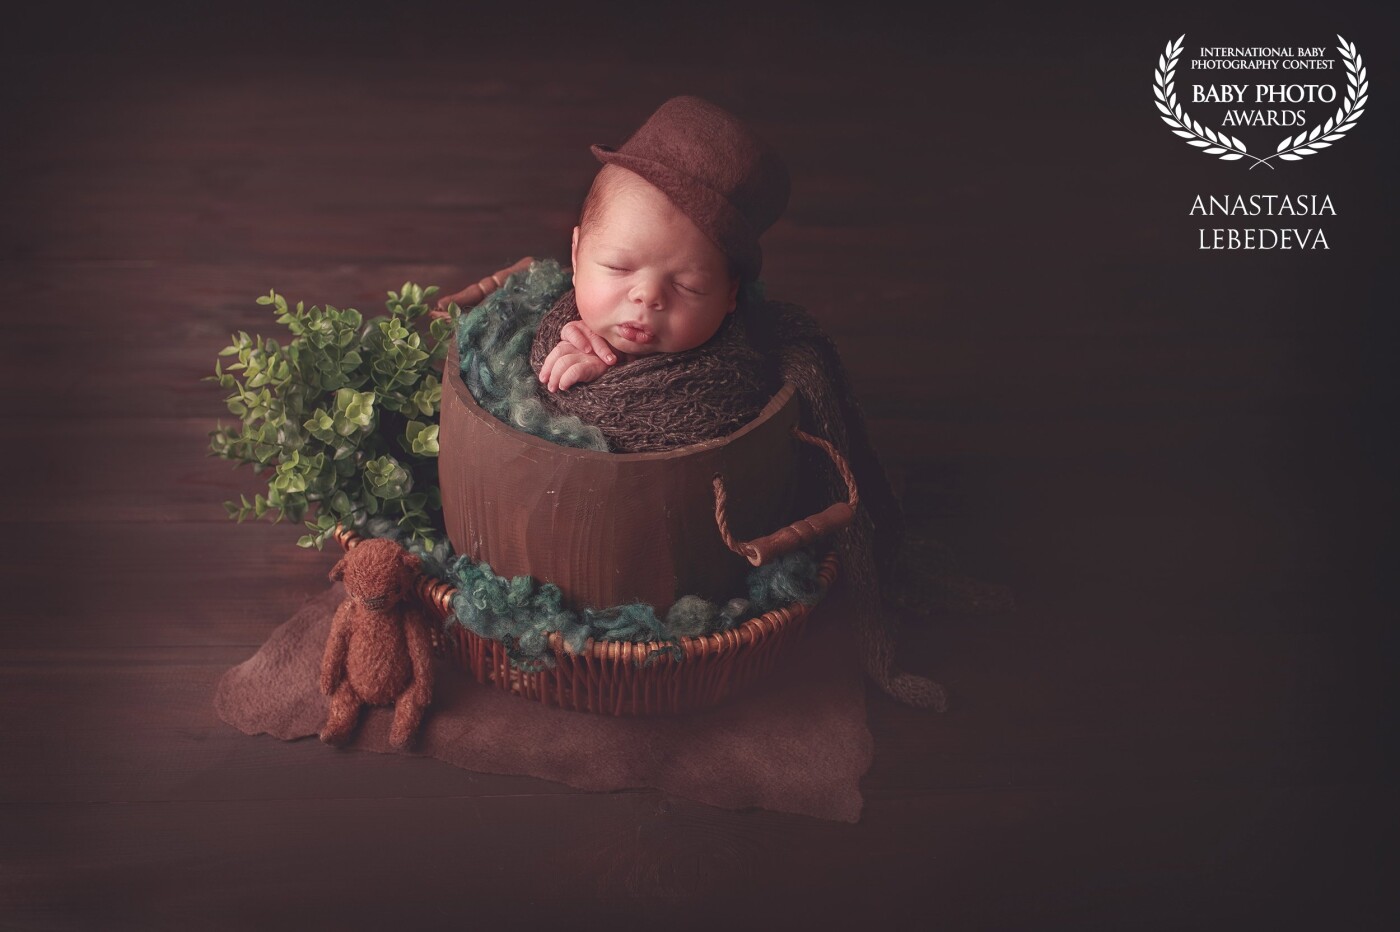 This little boy is called Leo. This sounds proudly!) The photo session was held in a beautiful setting. He was so cute, helped me) all the time asleep) What could be better for a newborn photographer is a good sleeping baby)